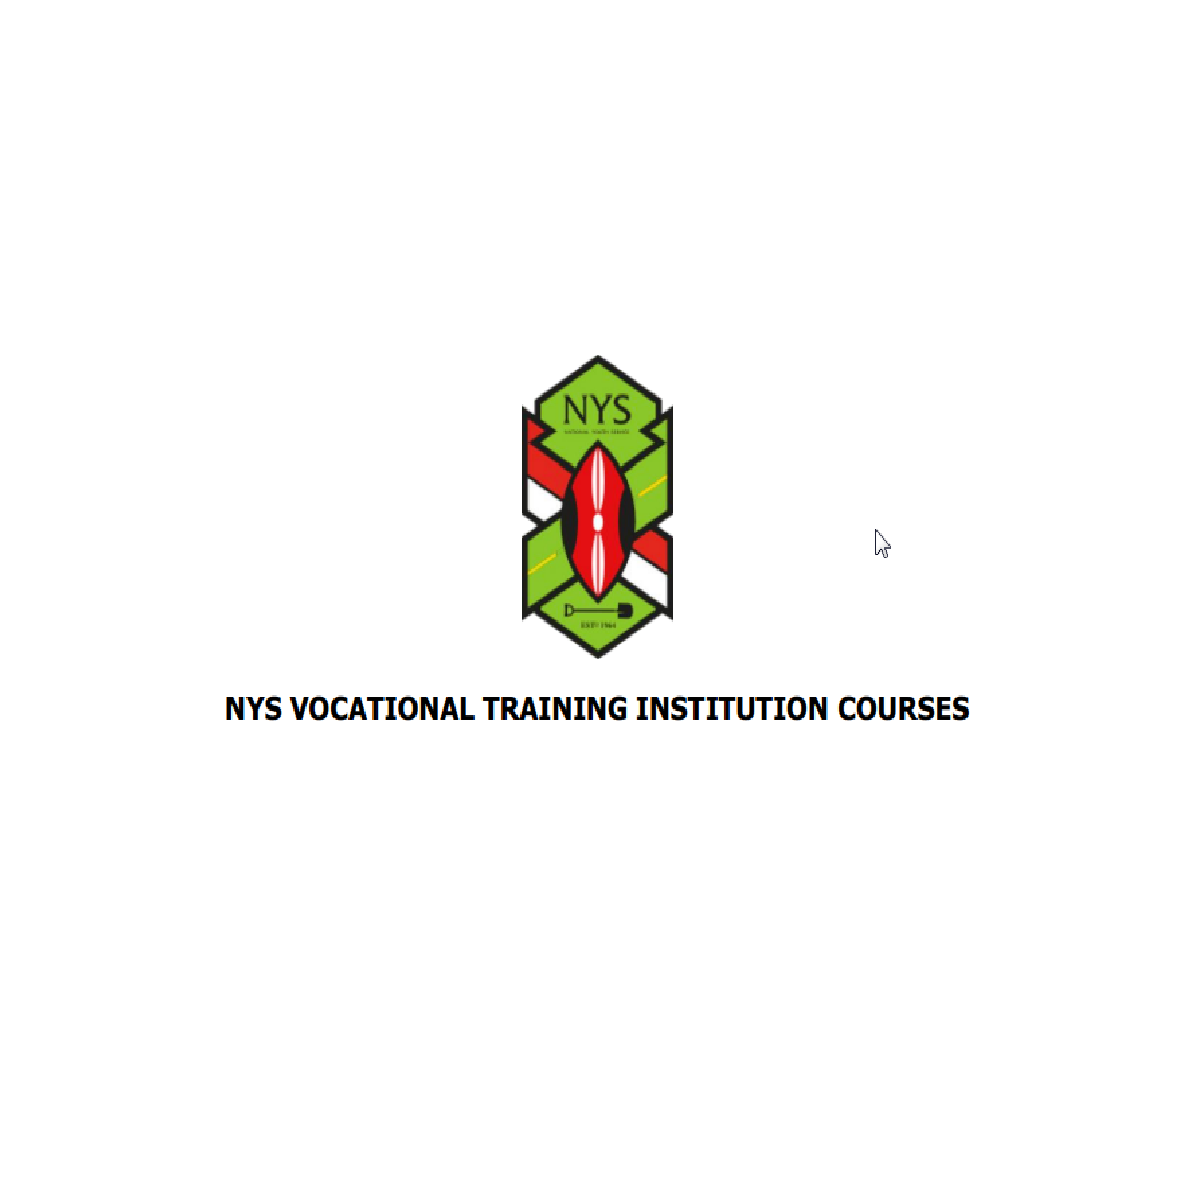 NYS courses offered